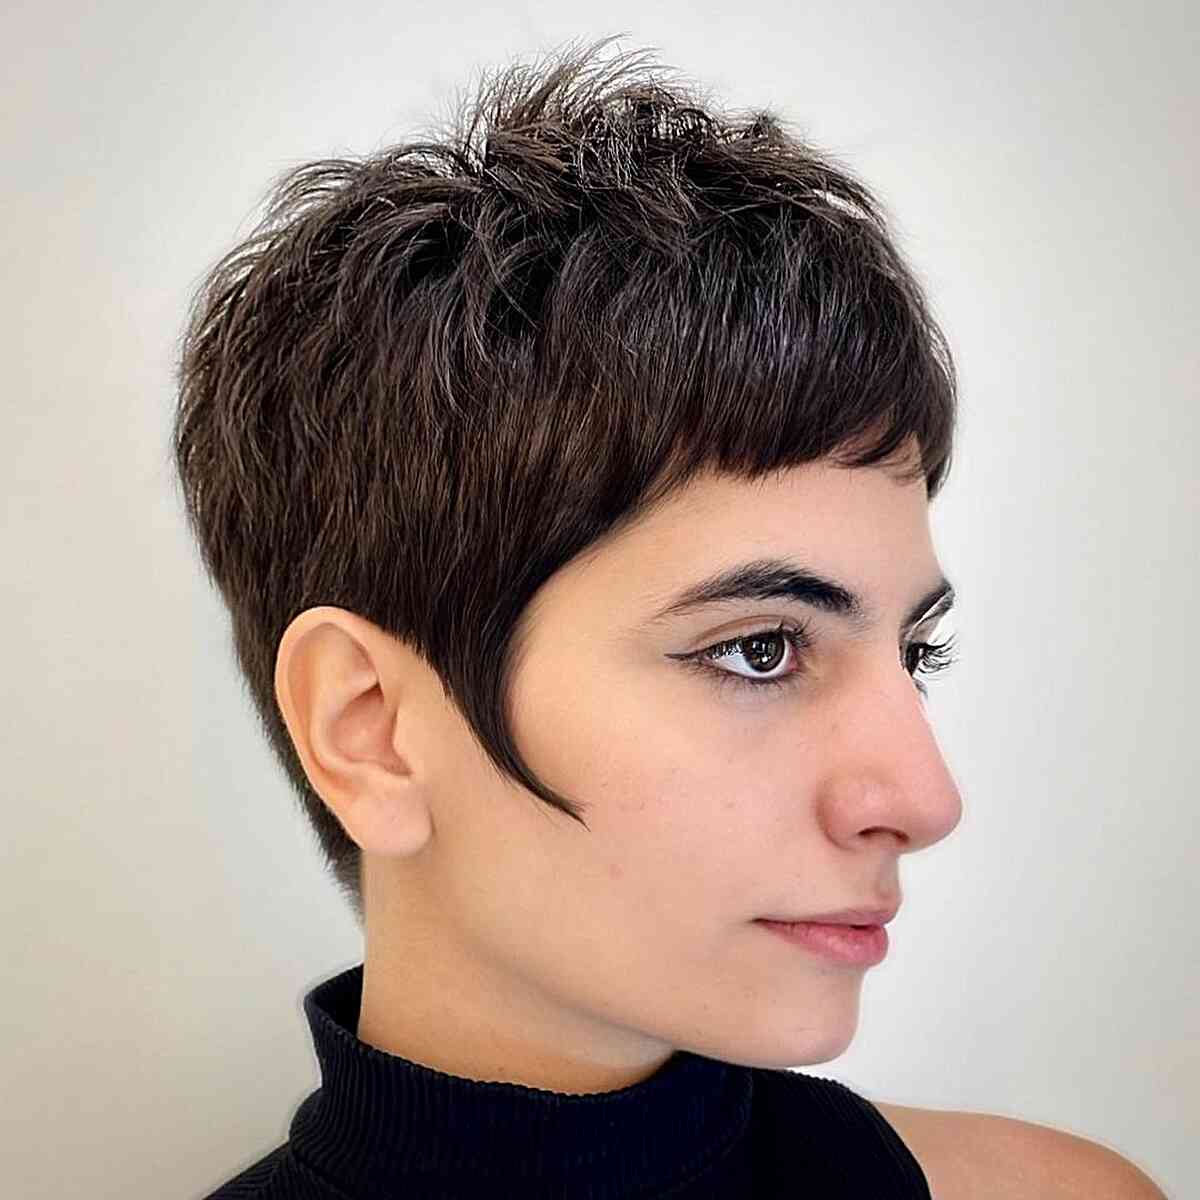 Geometric Pixie Cut with Texture for women with short dark hair